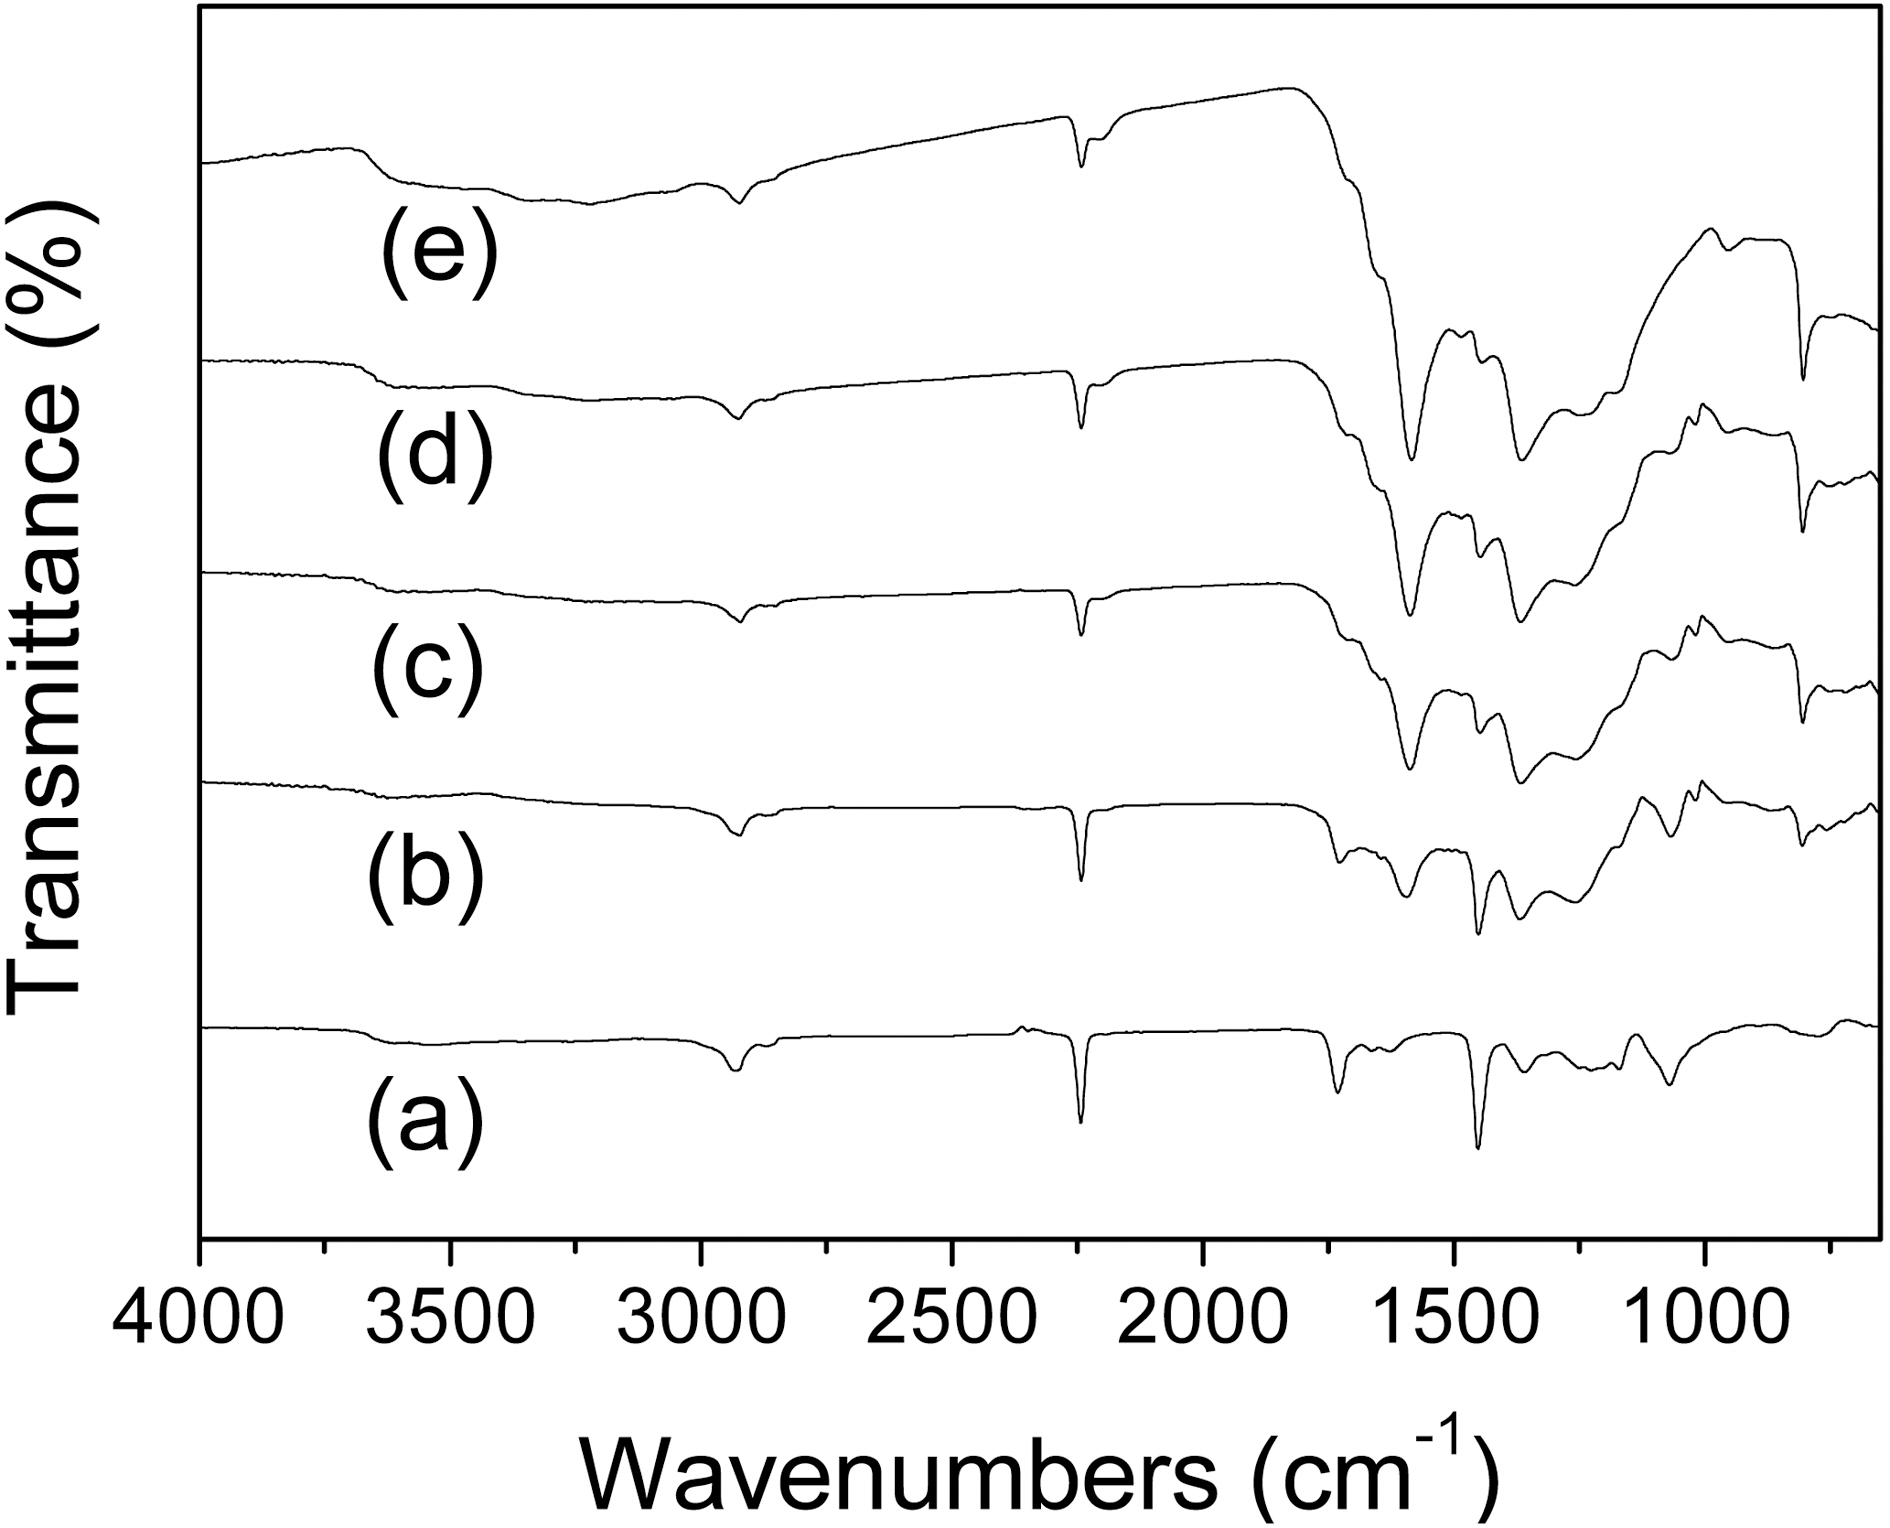 Fourier transform infrared spectra of (a) polyacrylonitrilfiber and its stabilized fibers for 60 min at: (b) 166-234oC (c)180-247oC (d) 193-260oC and (e) 207-273oC.